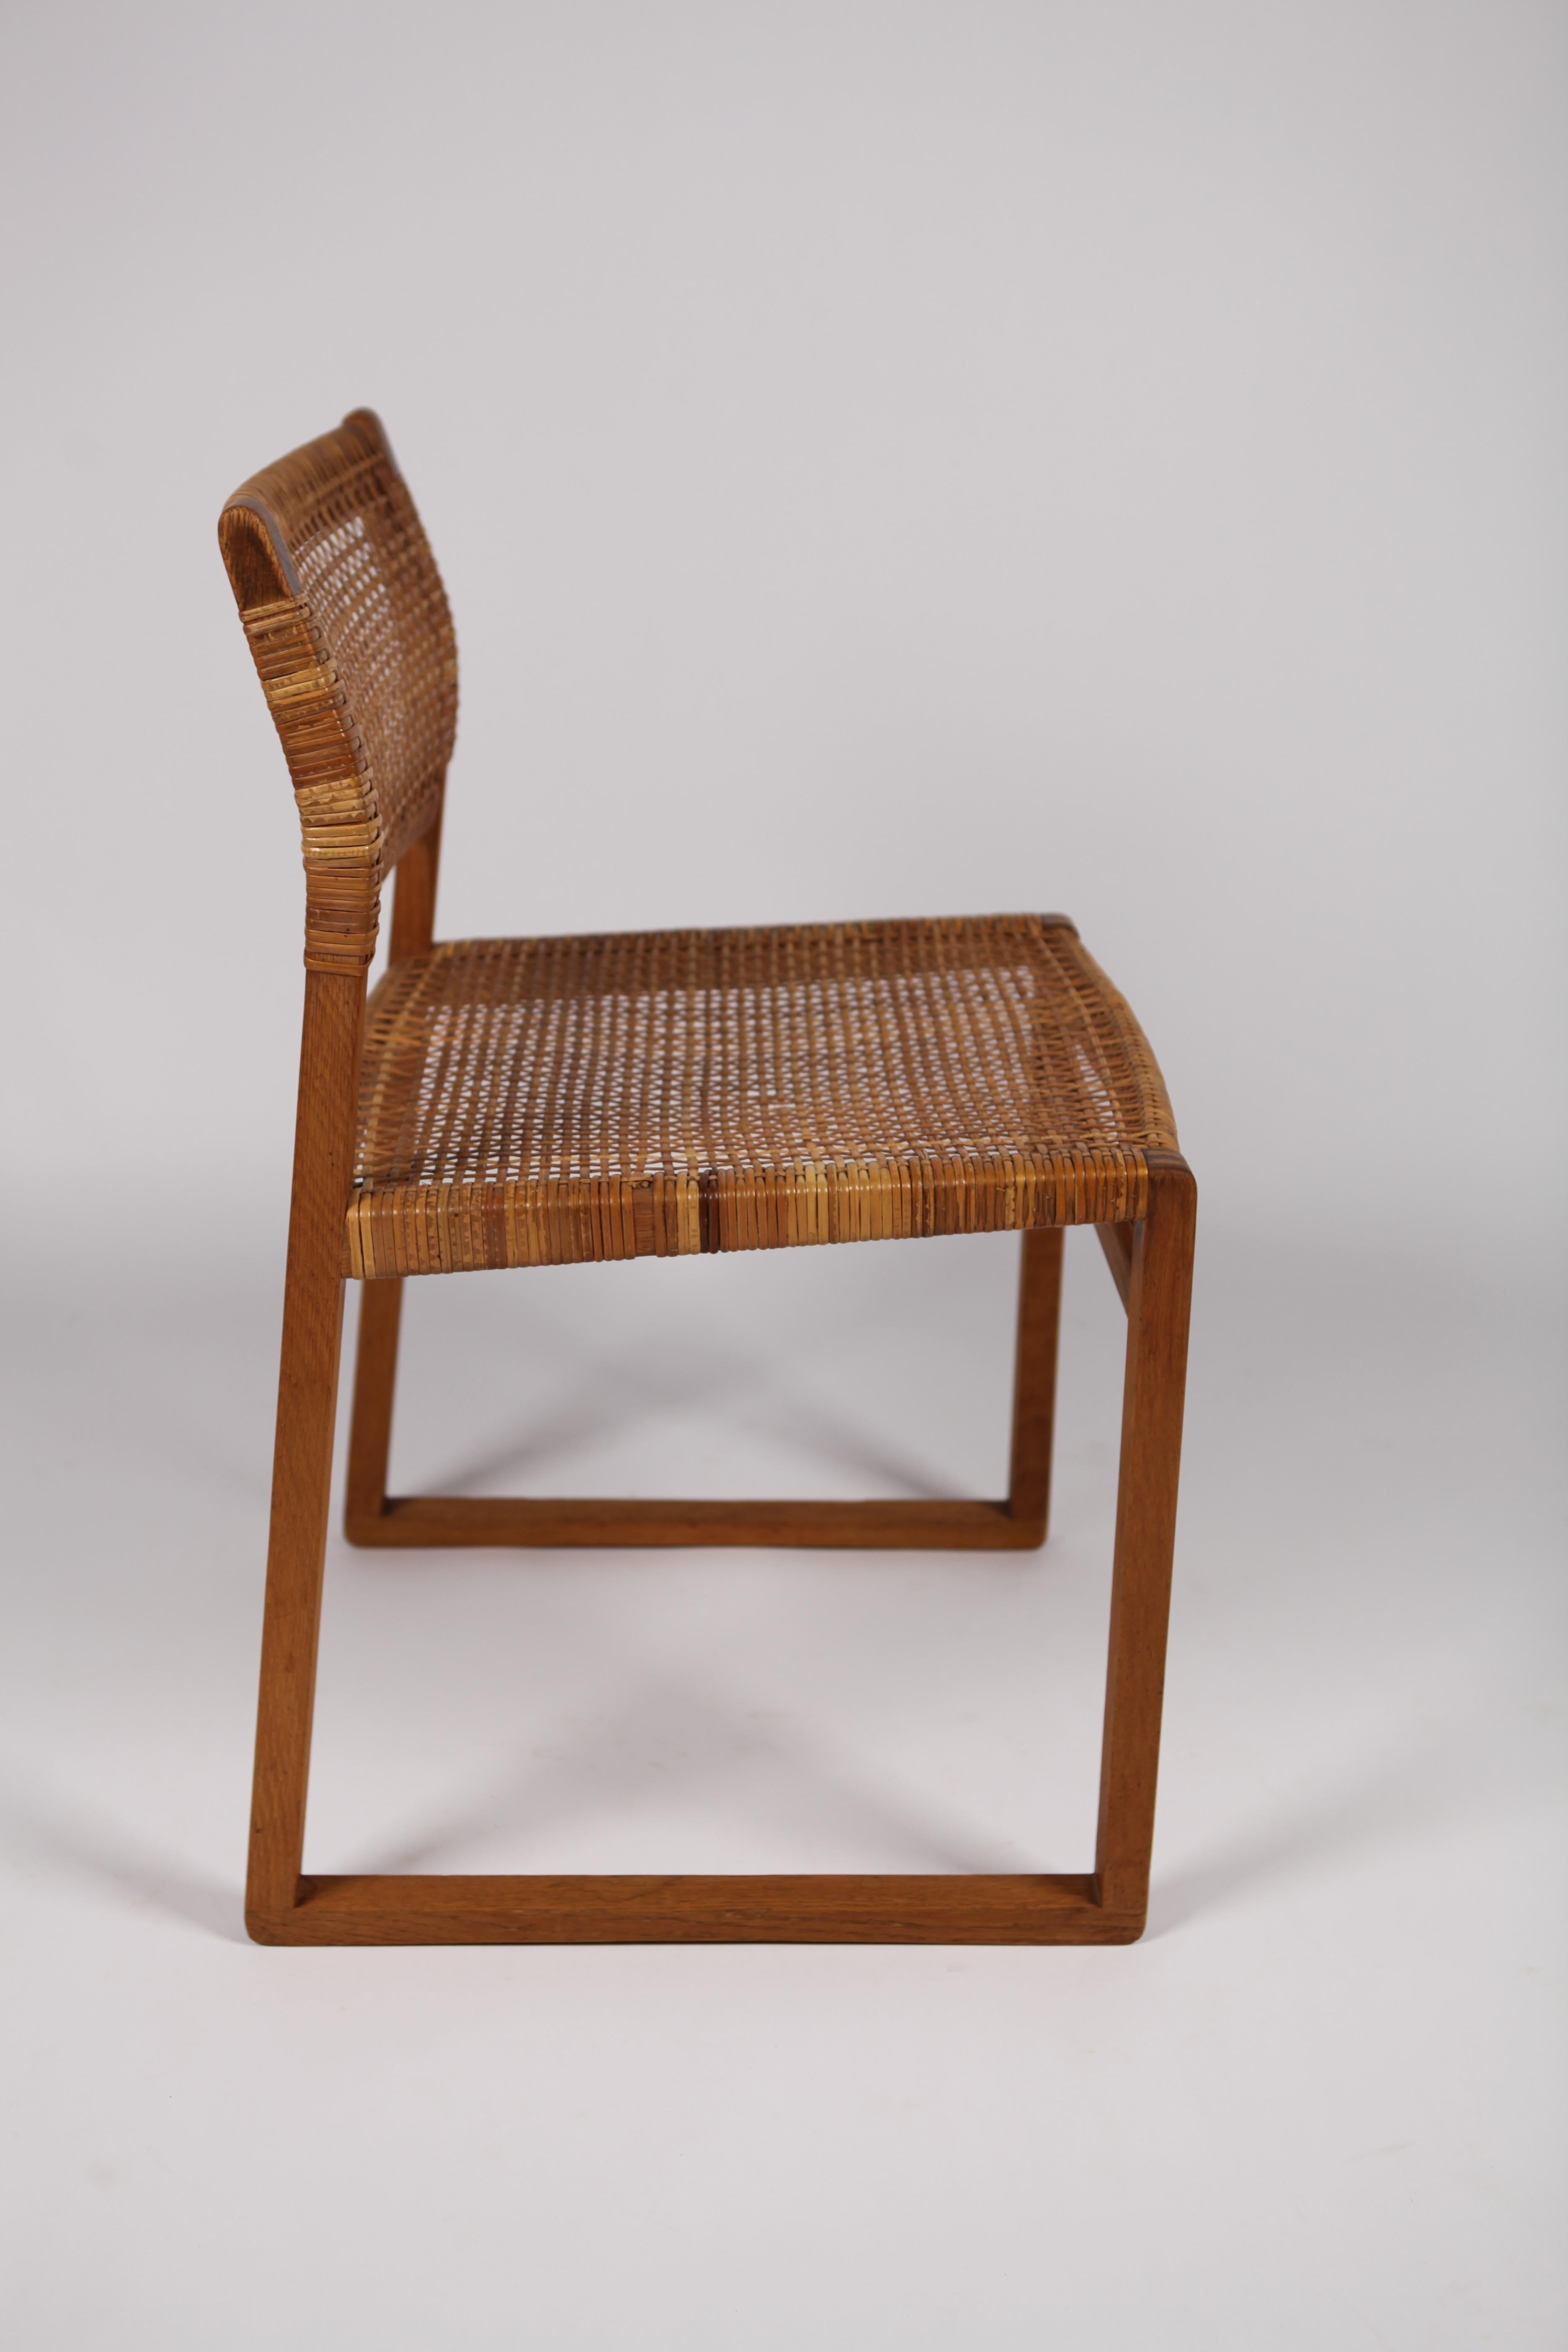 Børge Mogensen, Dining Chairs in Oak and Woven Cane, Denmark, 1957 6